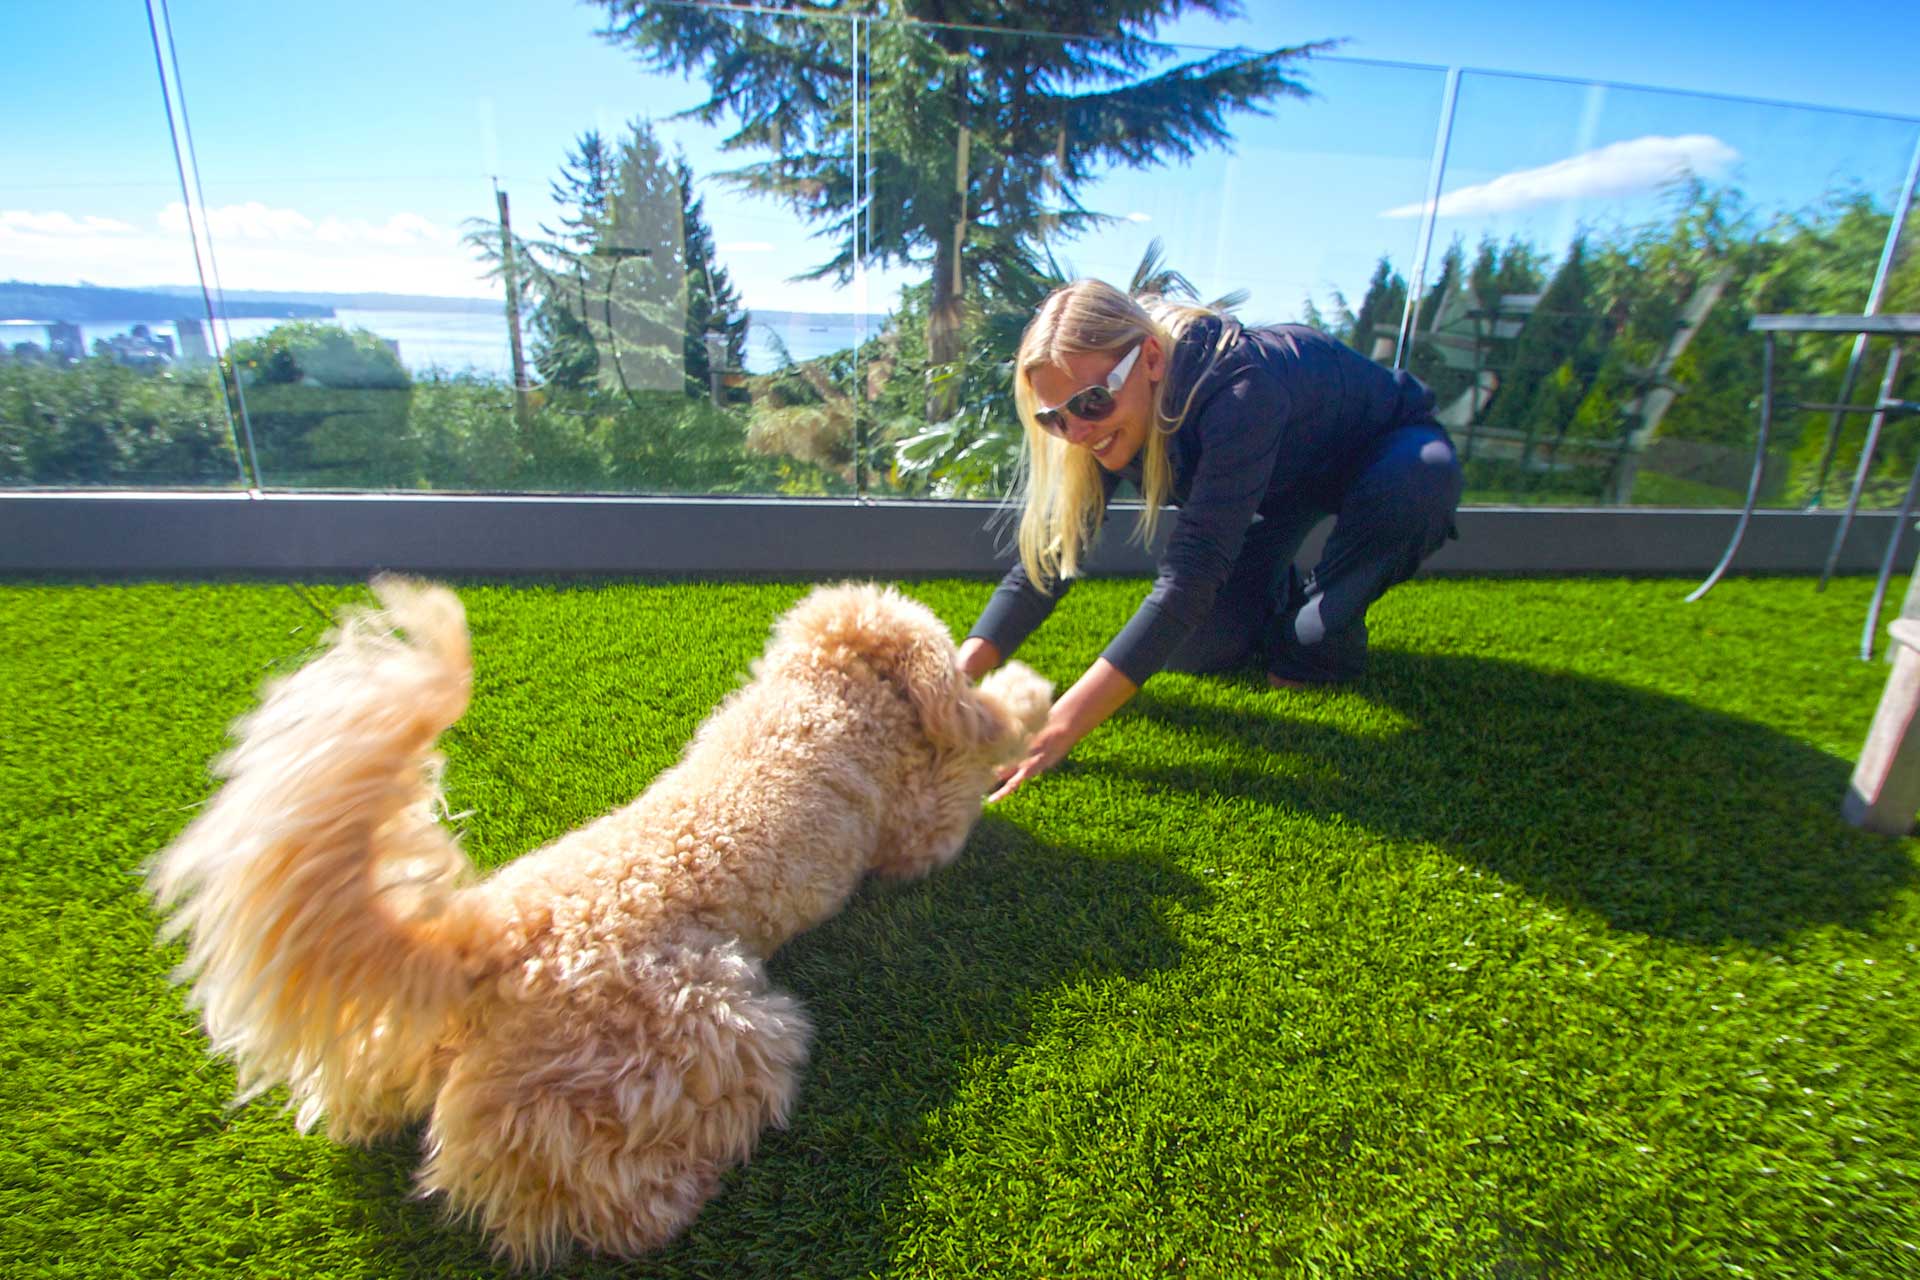 Dog playing with owner on SYNLawn artificial grass